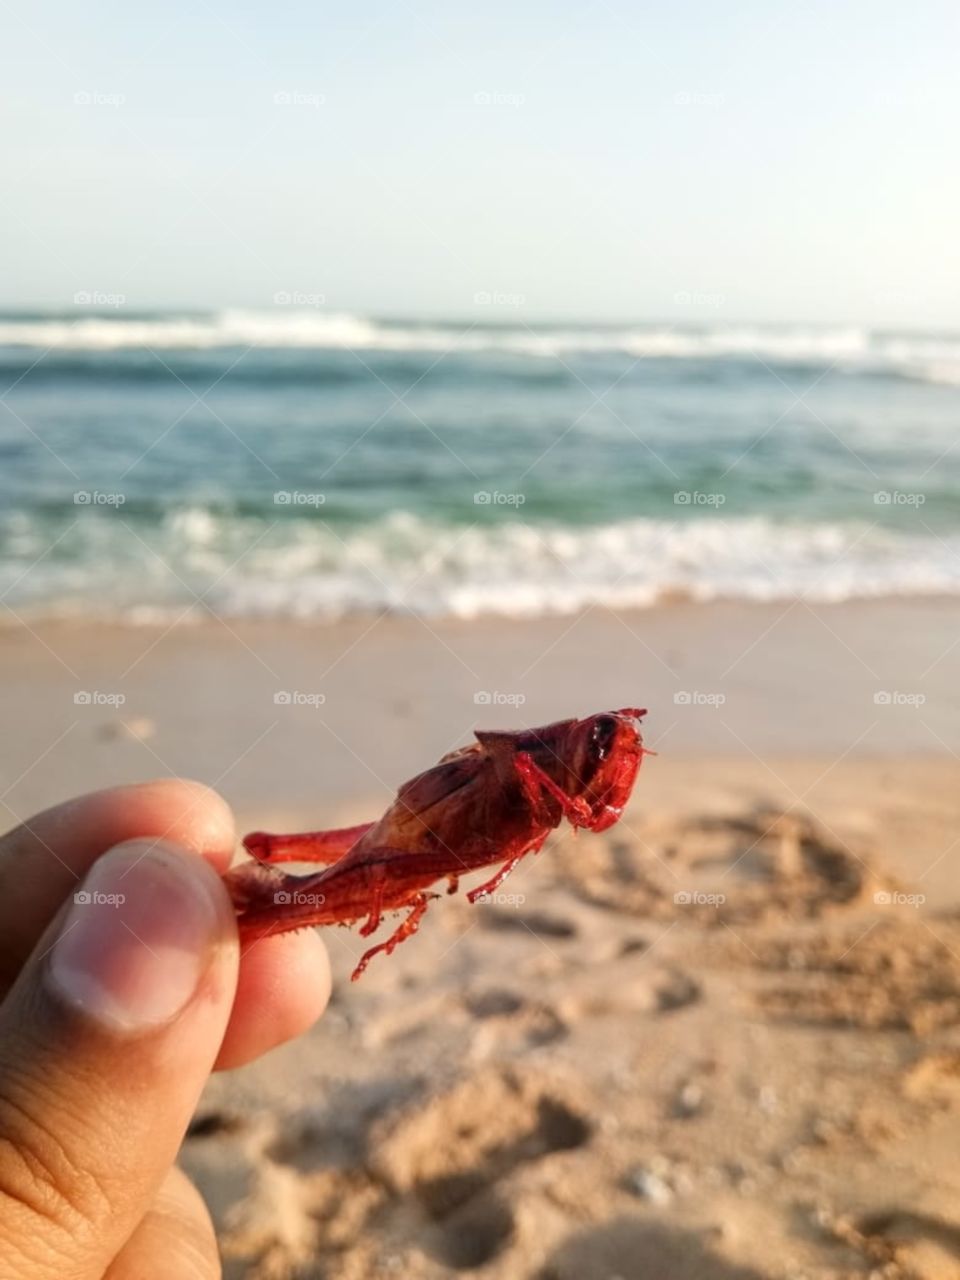 Fried grasshoppers from Yogyakarta are very tasty at eating on the beach